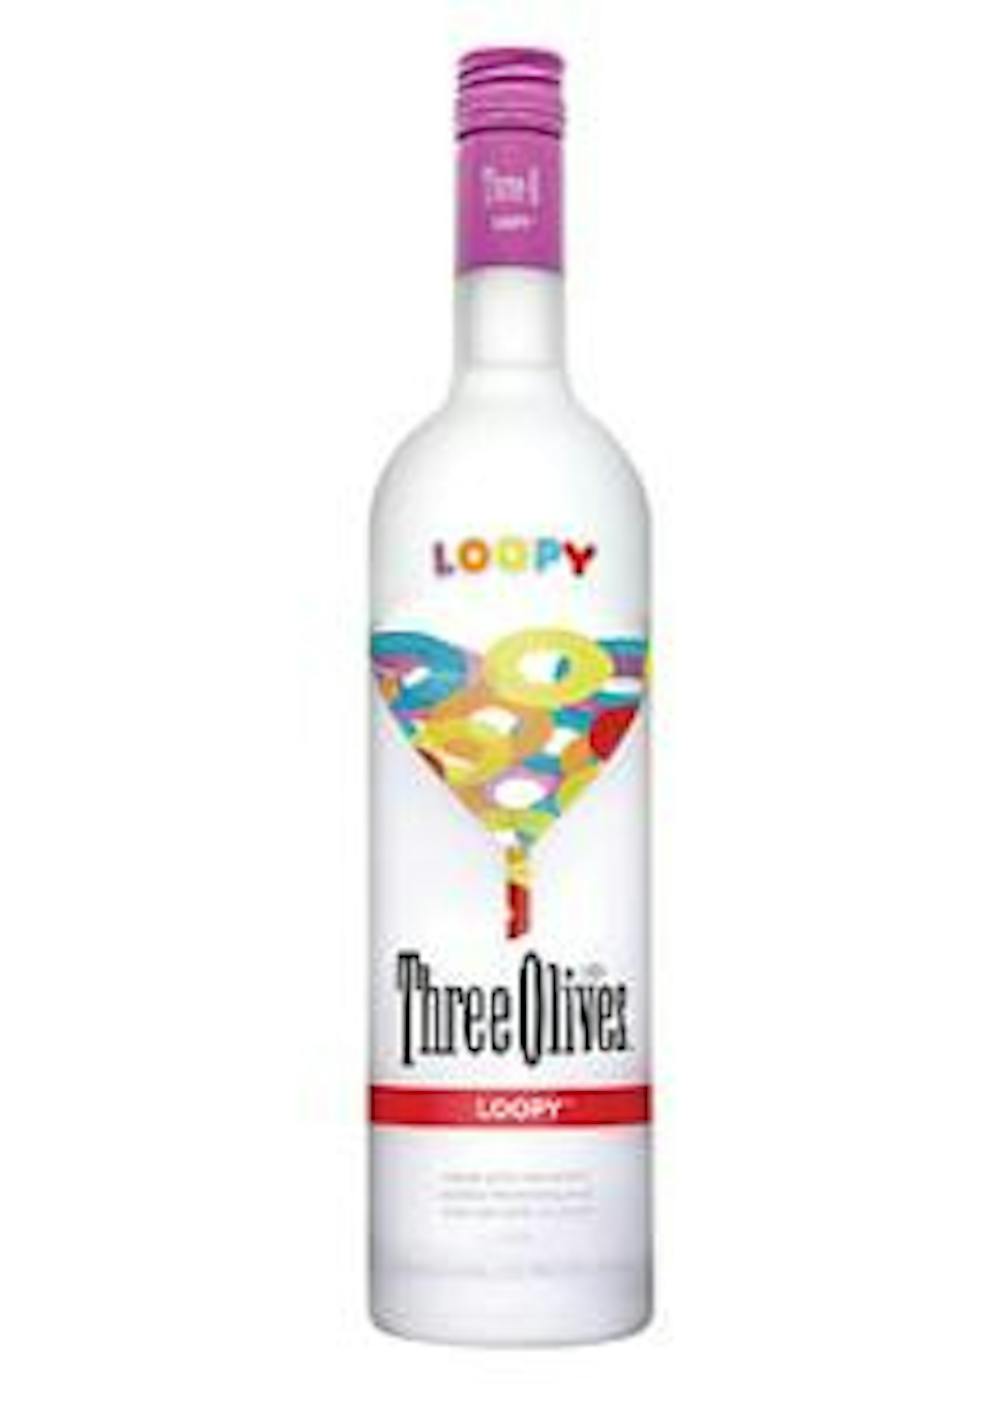 three olives loopy review